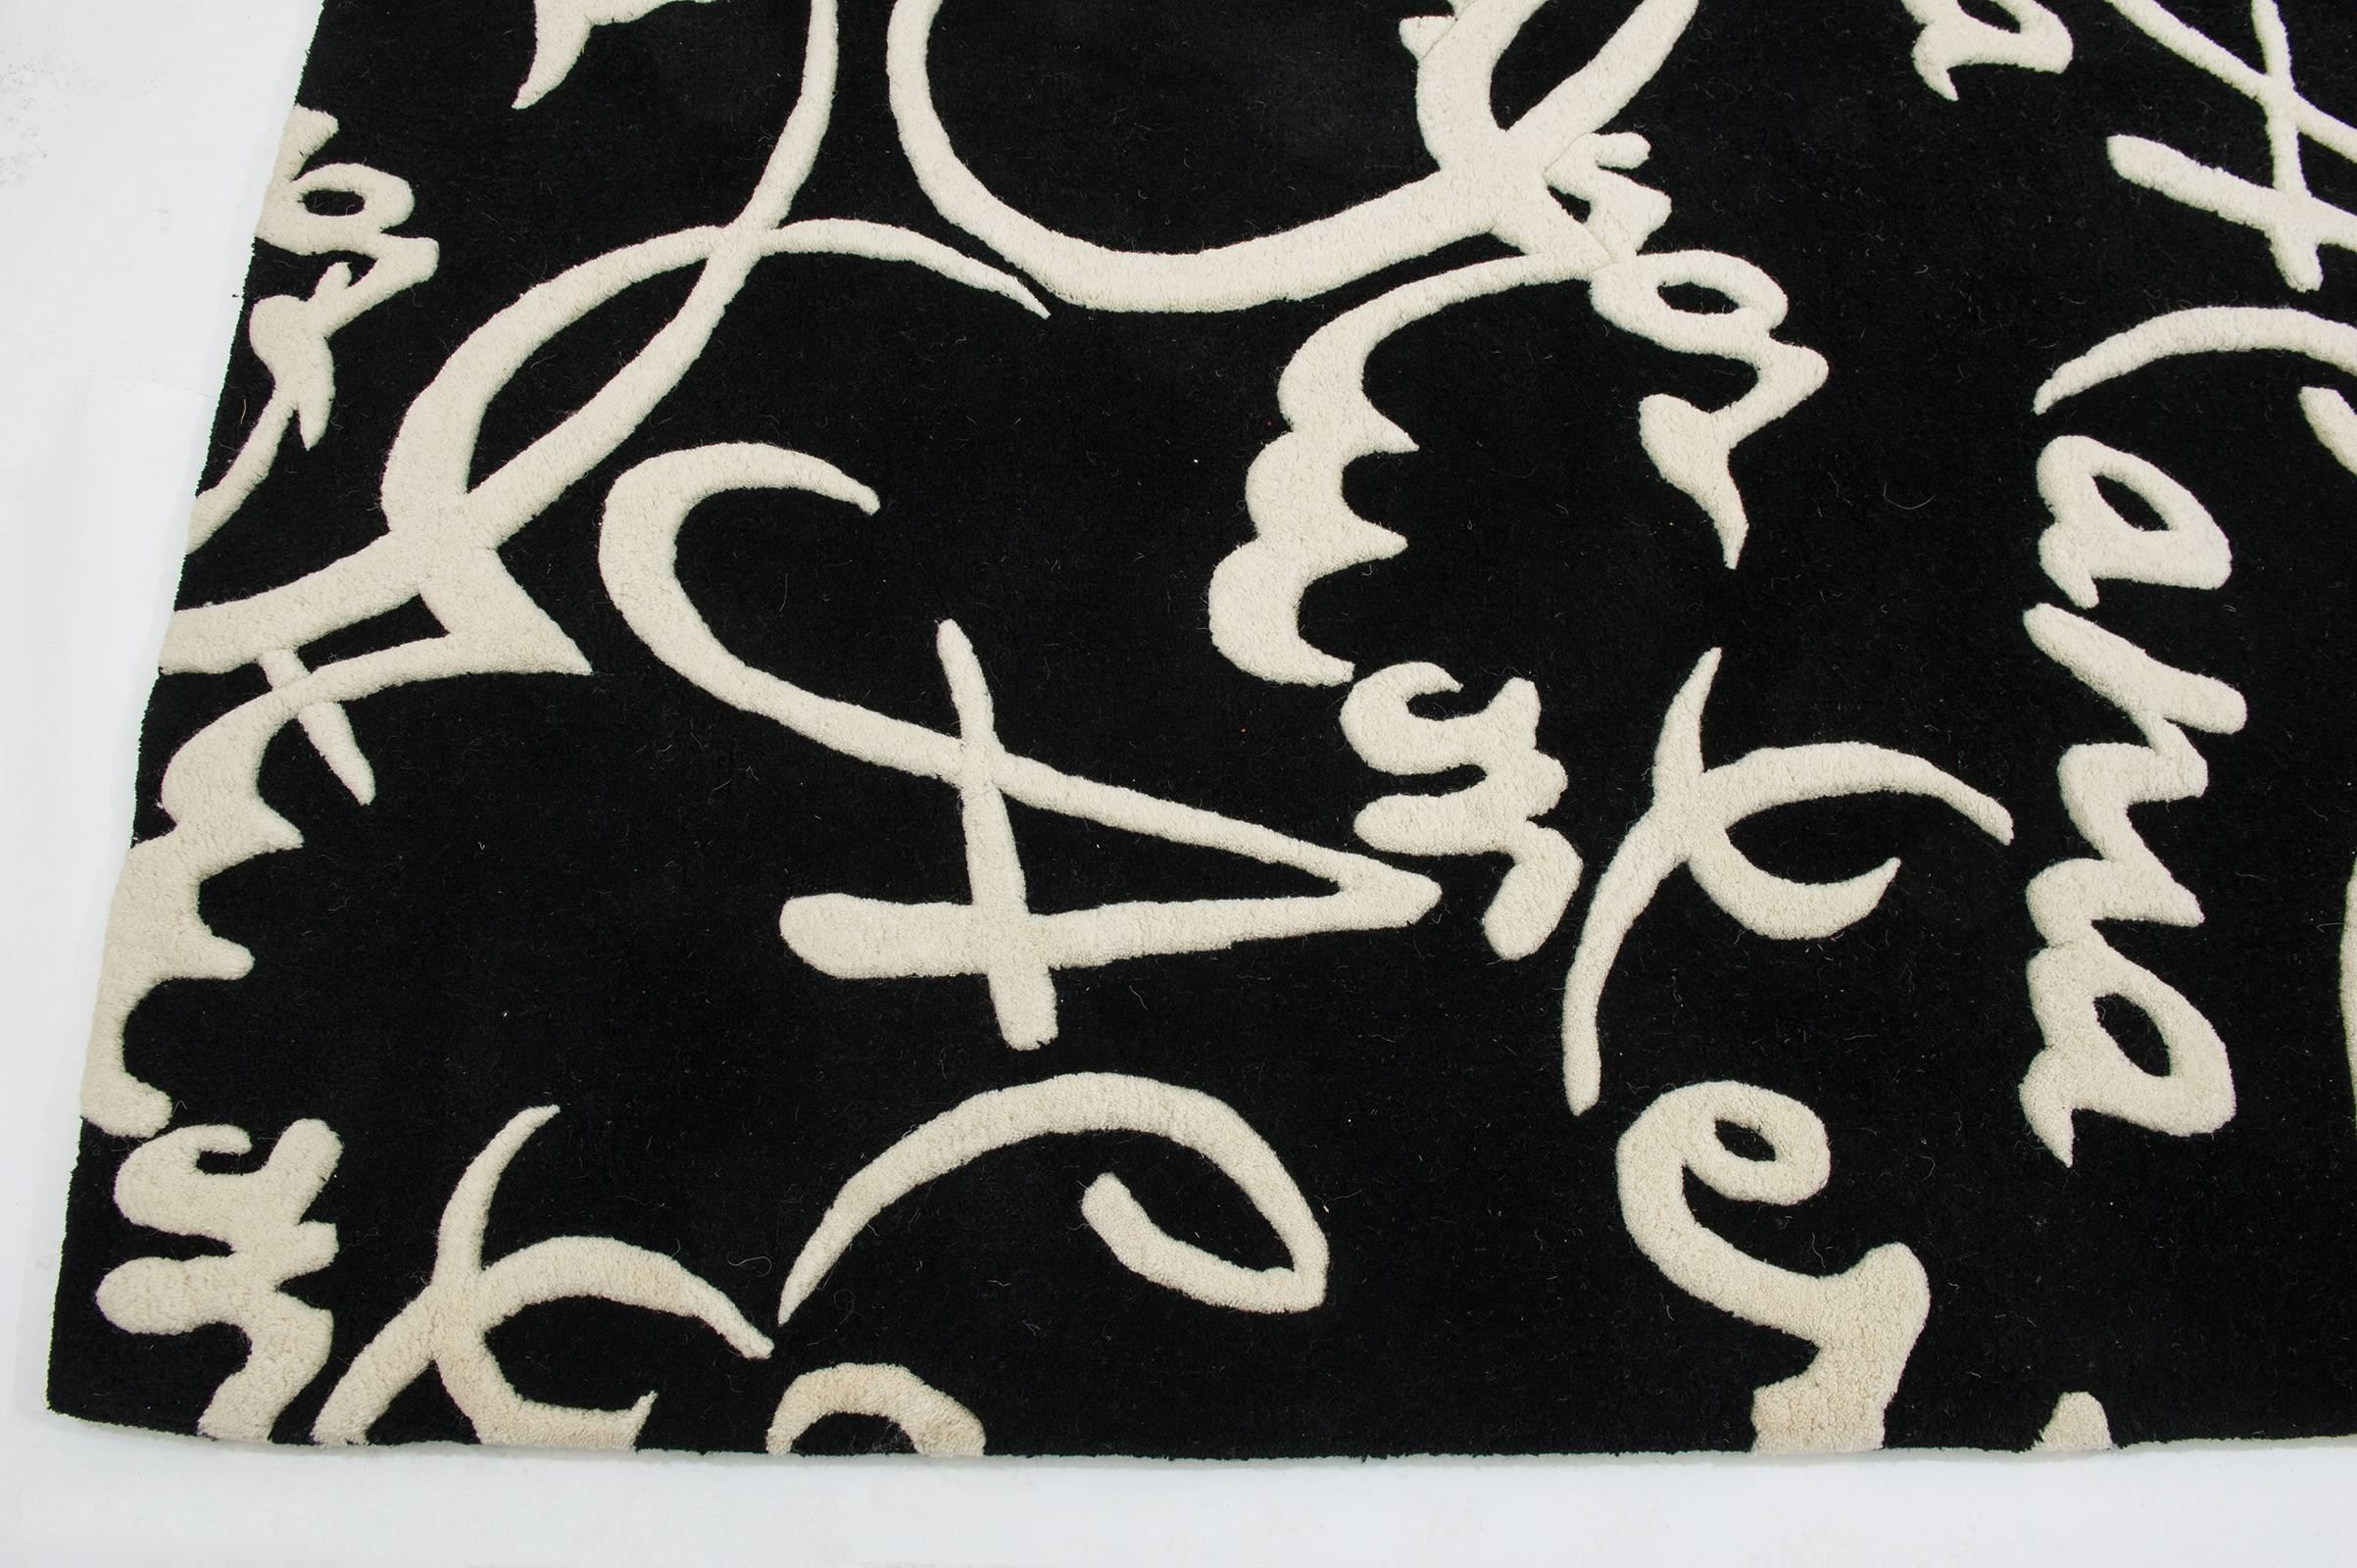 Hand-Woven Modern  Black and White Spanish  Carpet -FINAL CLEARANCE SALE For Sale